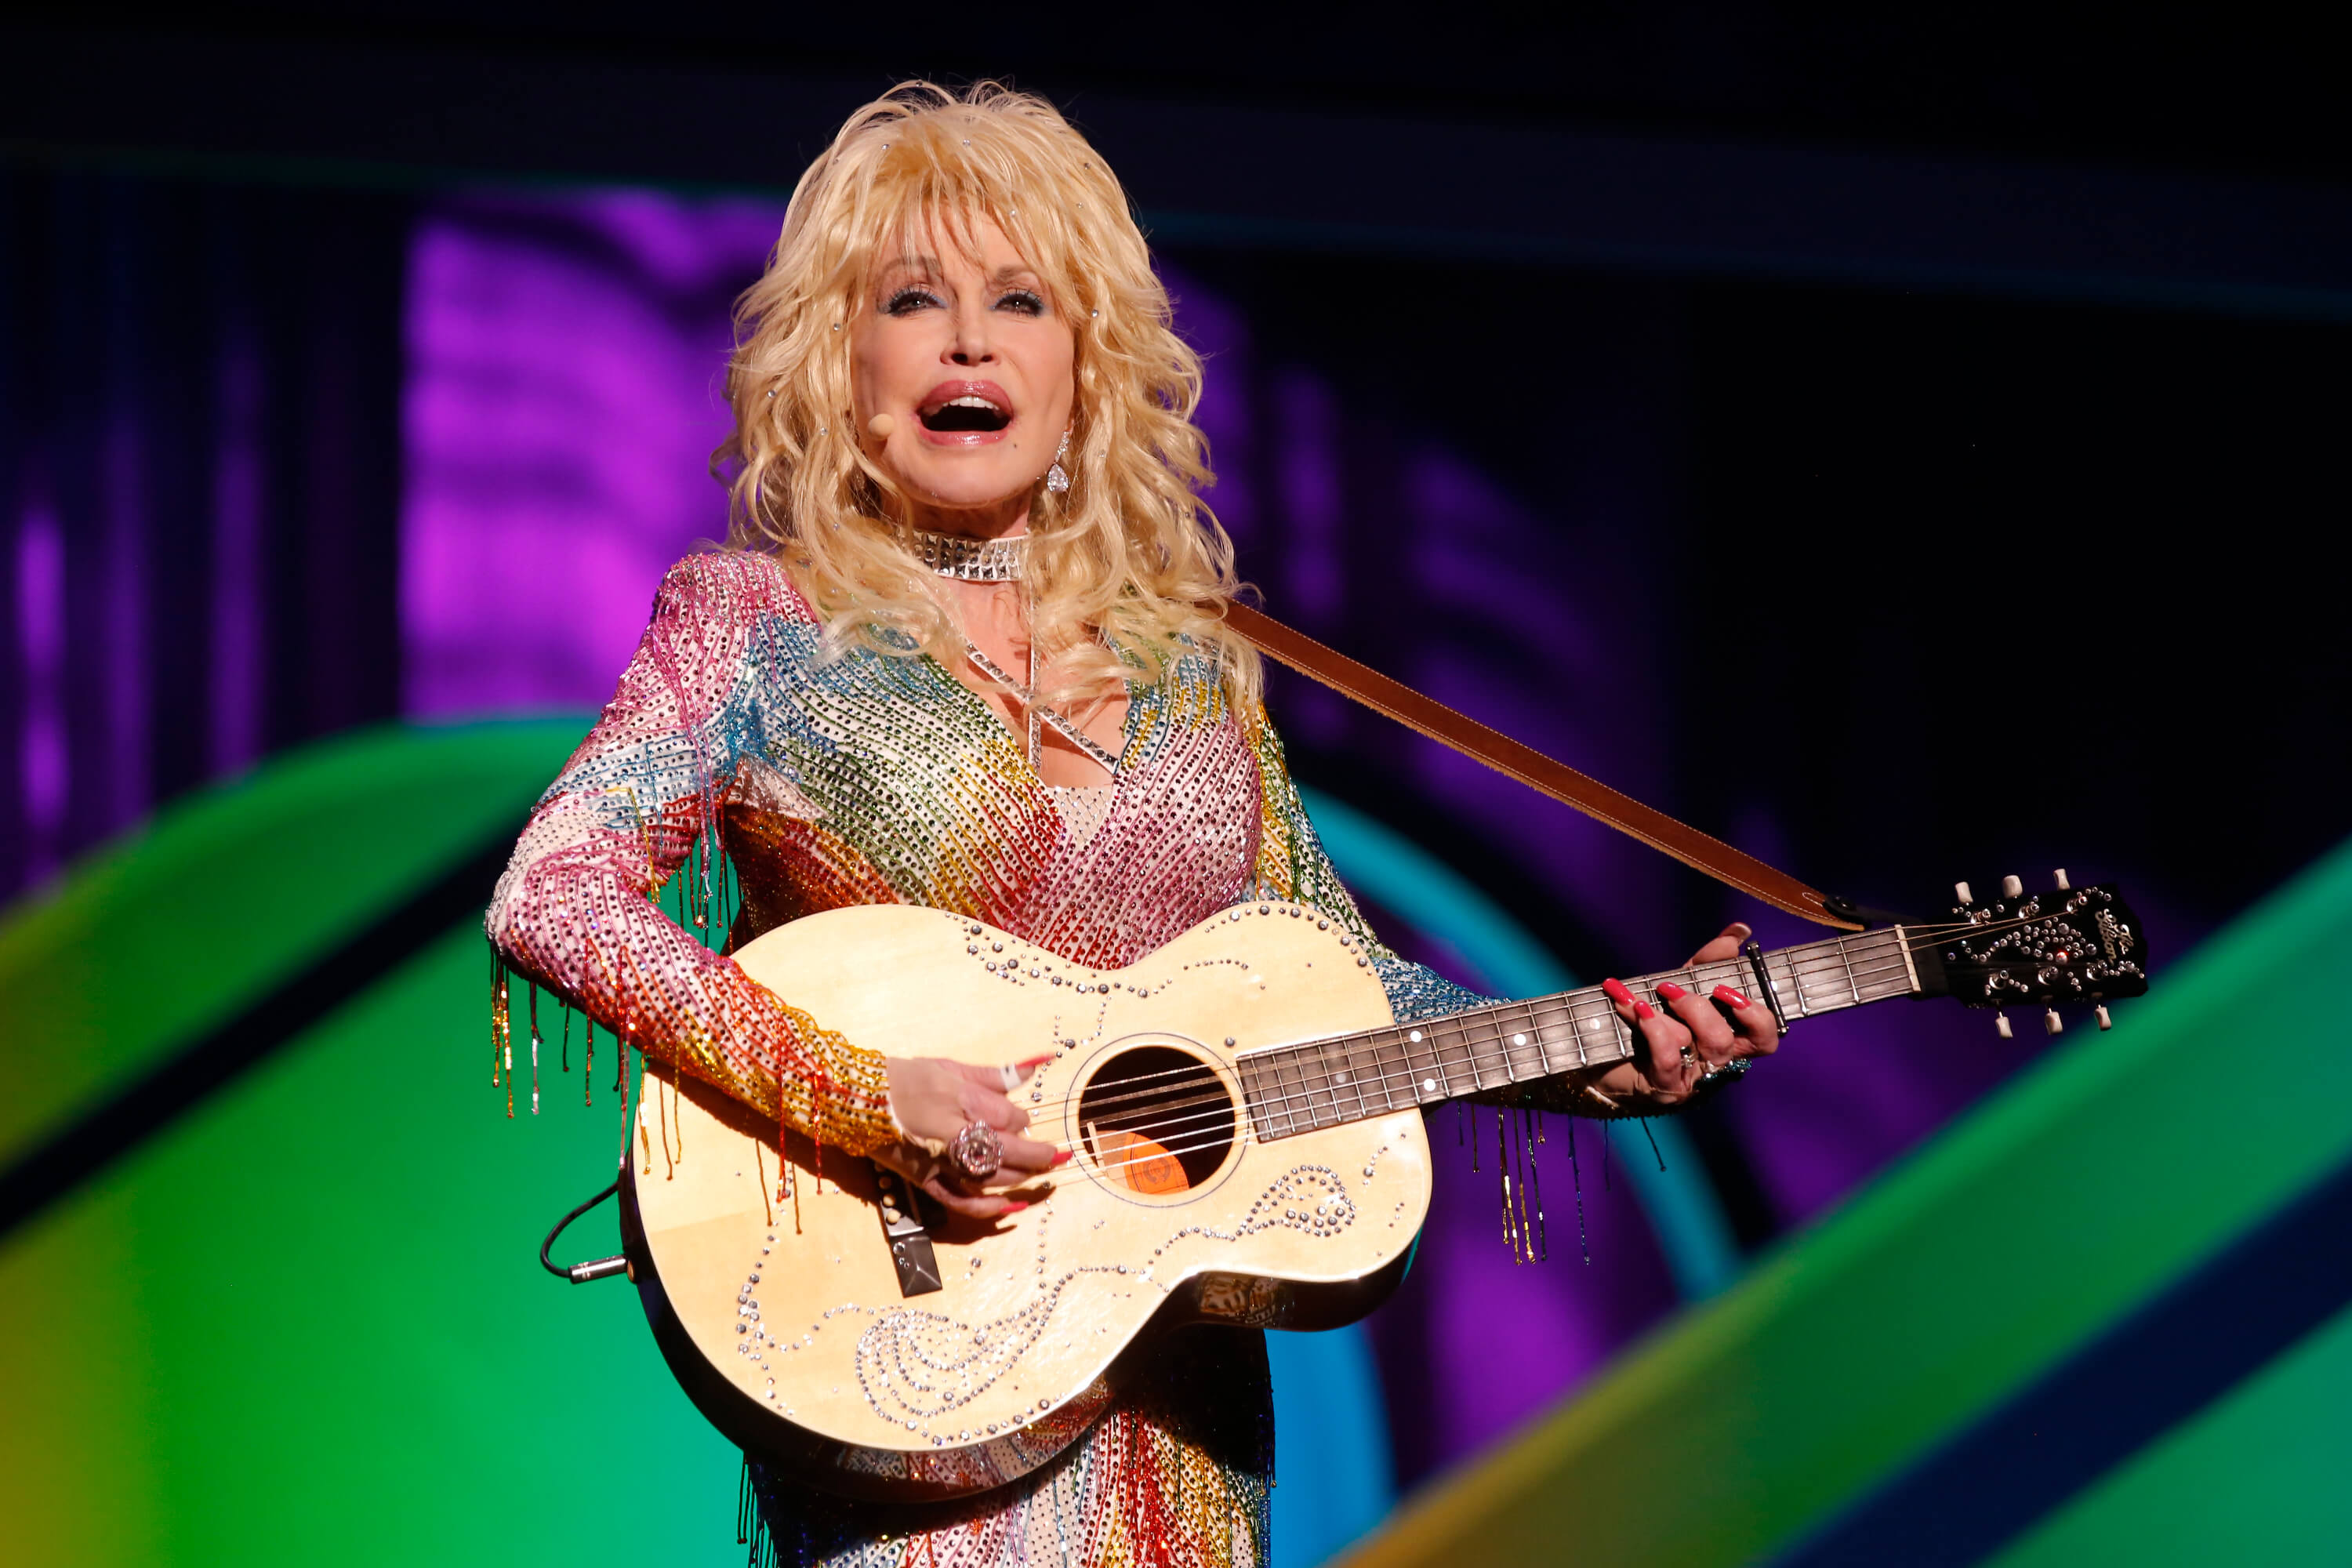 Dolly Parton in a rainbow dress, playing guitar.